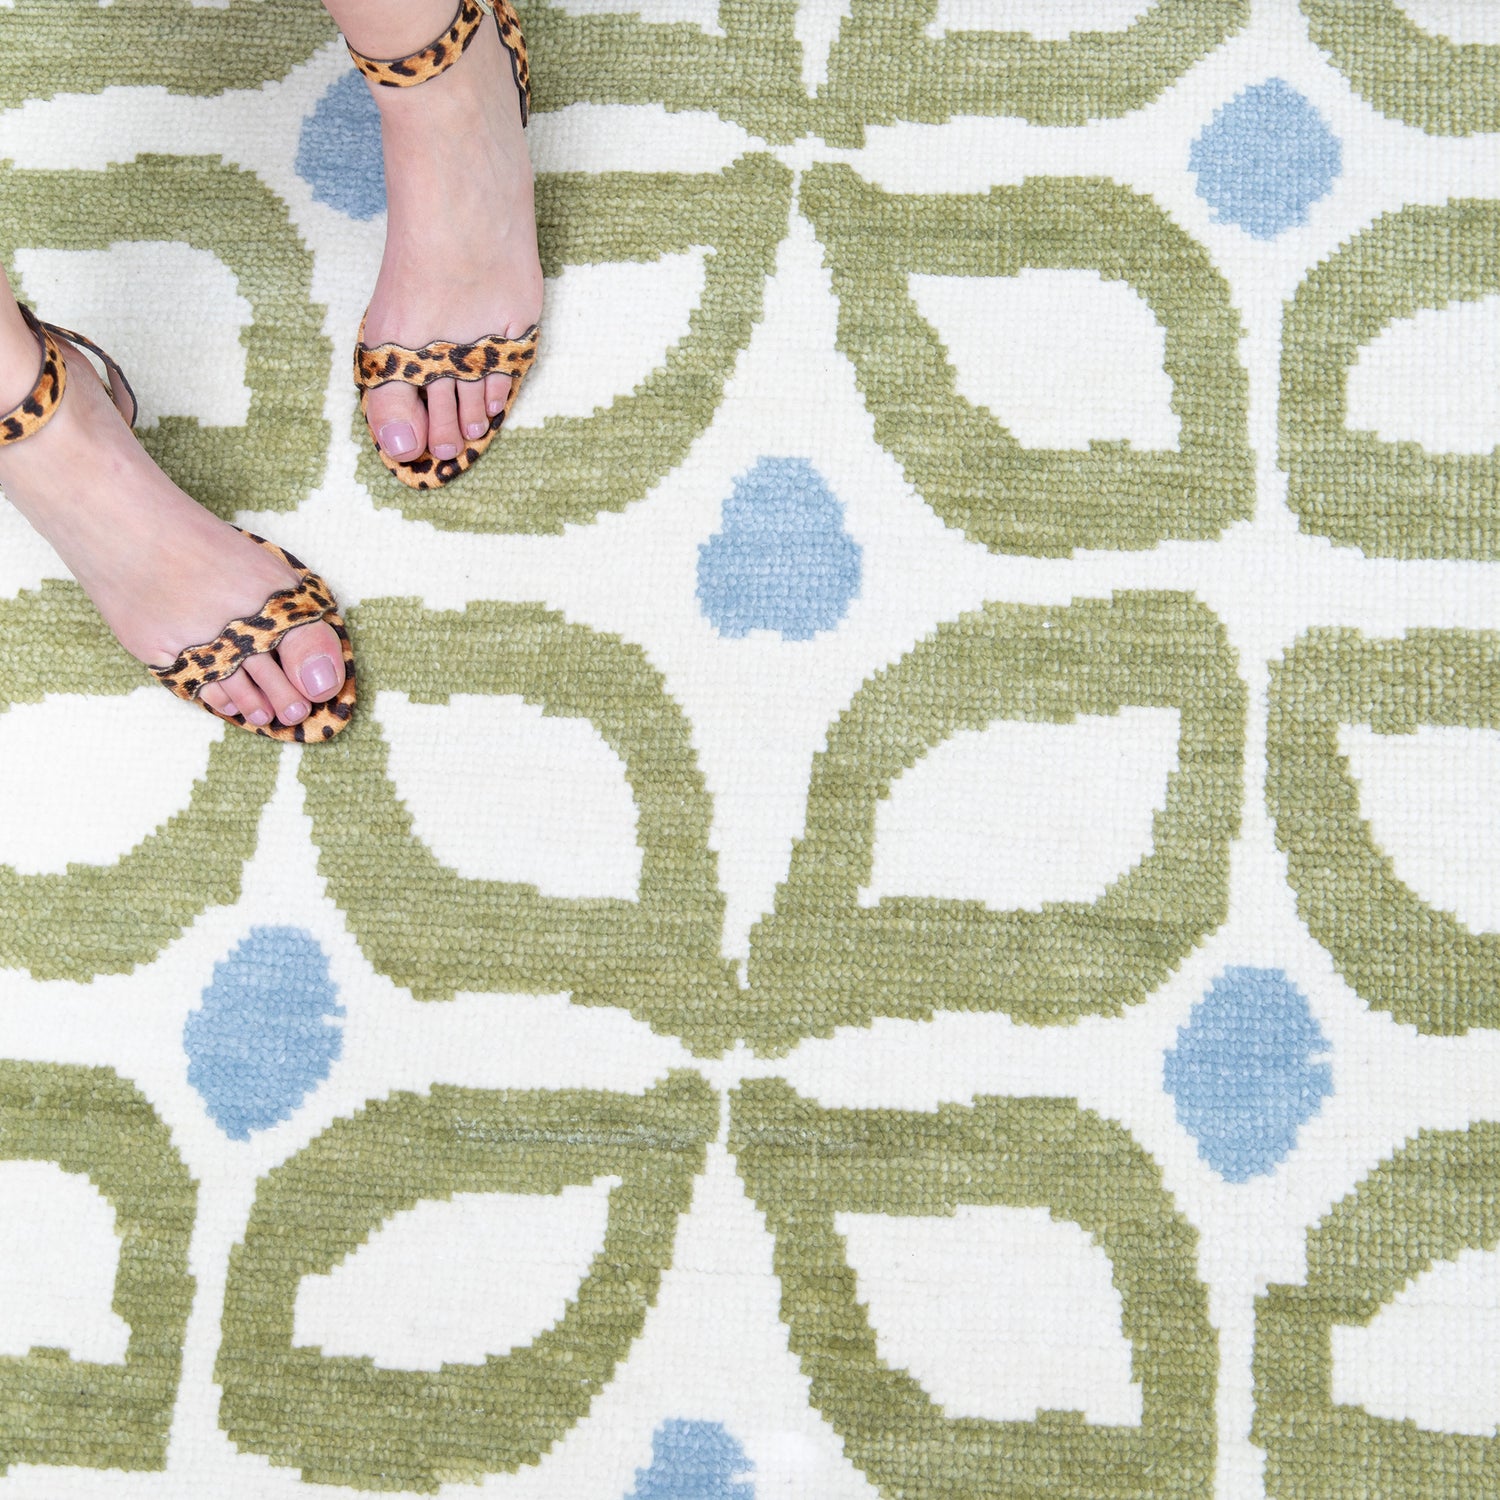 Moss Green Geometric Printed Rug Close-up with cheetah print heels on woman's feet in the upper left corner